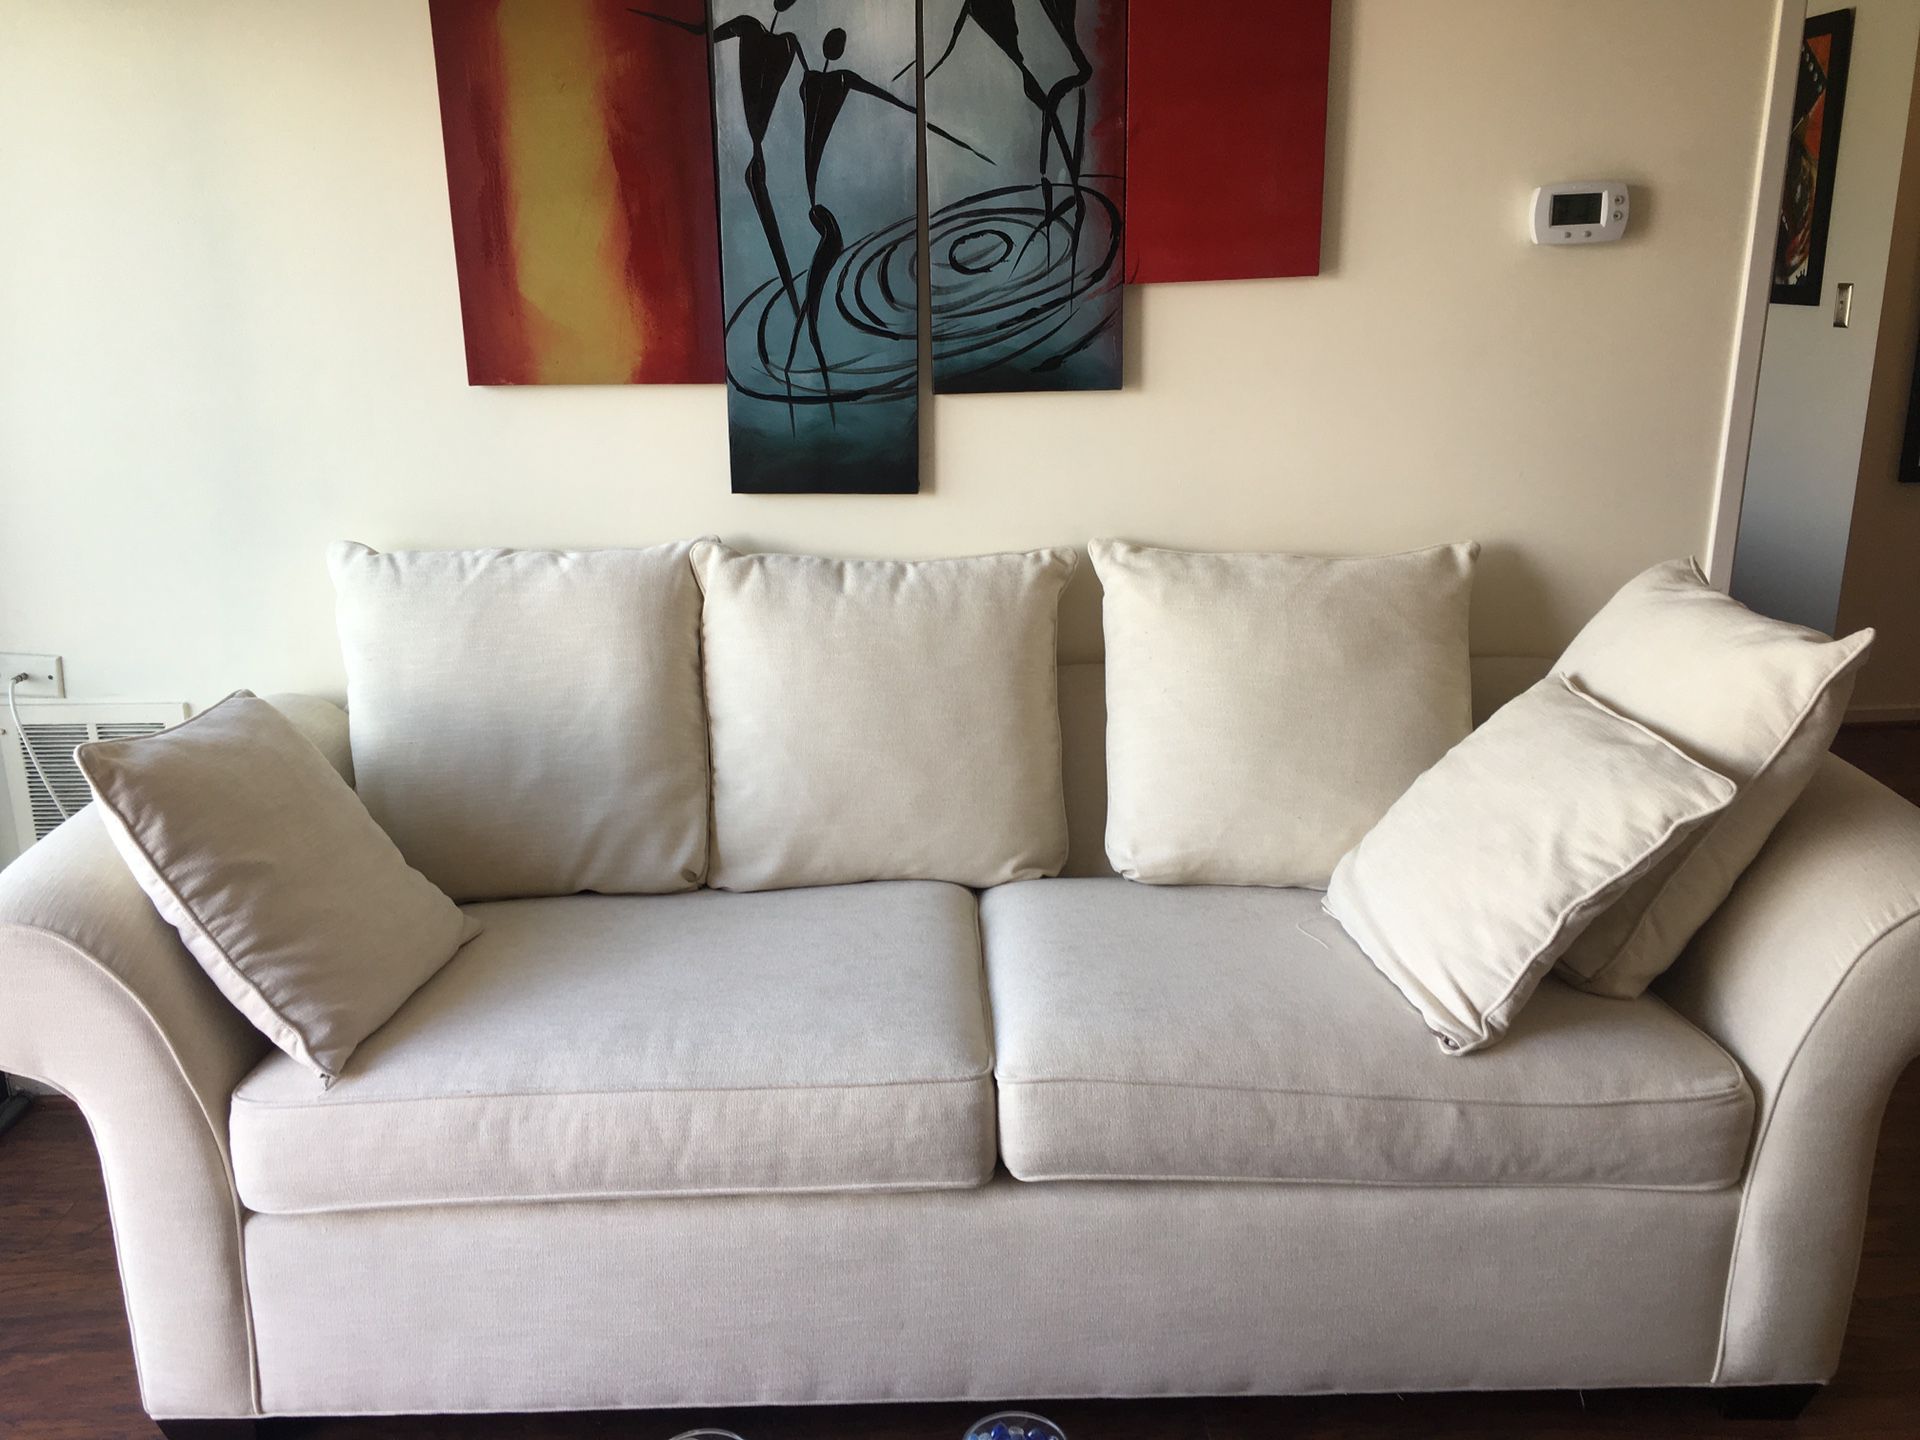 Pottery Barn couch - excellent condition